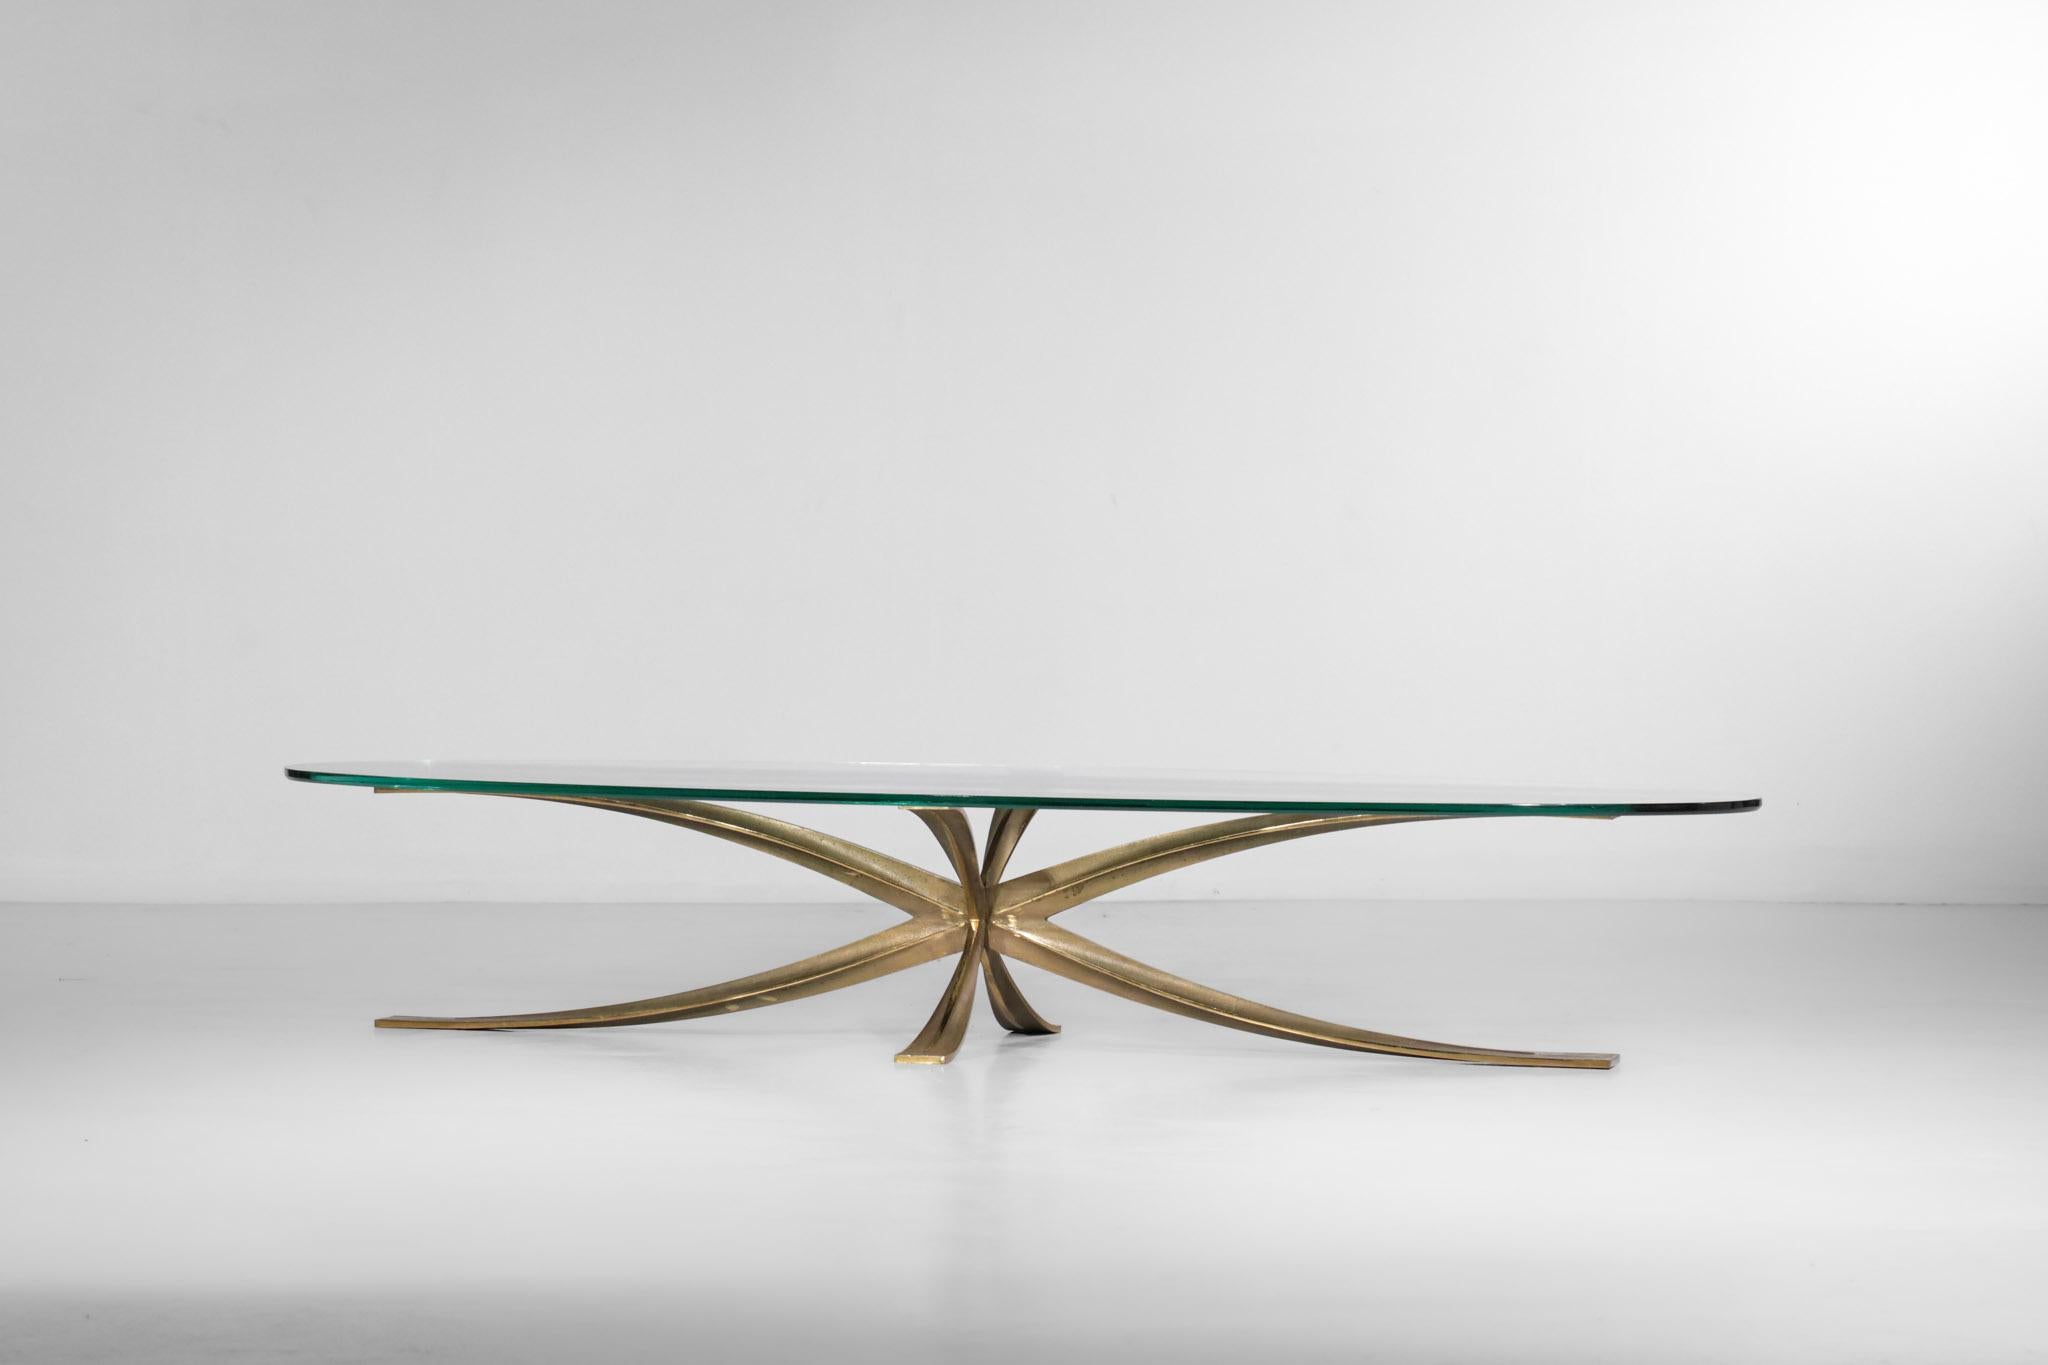 Large Michel Mangematin Coffee Table in Gilt Bronze and Oval Glass 1960's Design For Sale 2